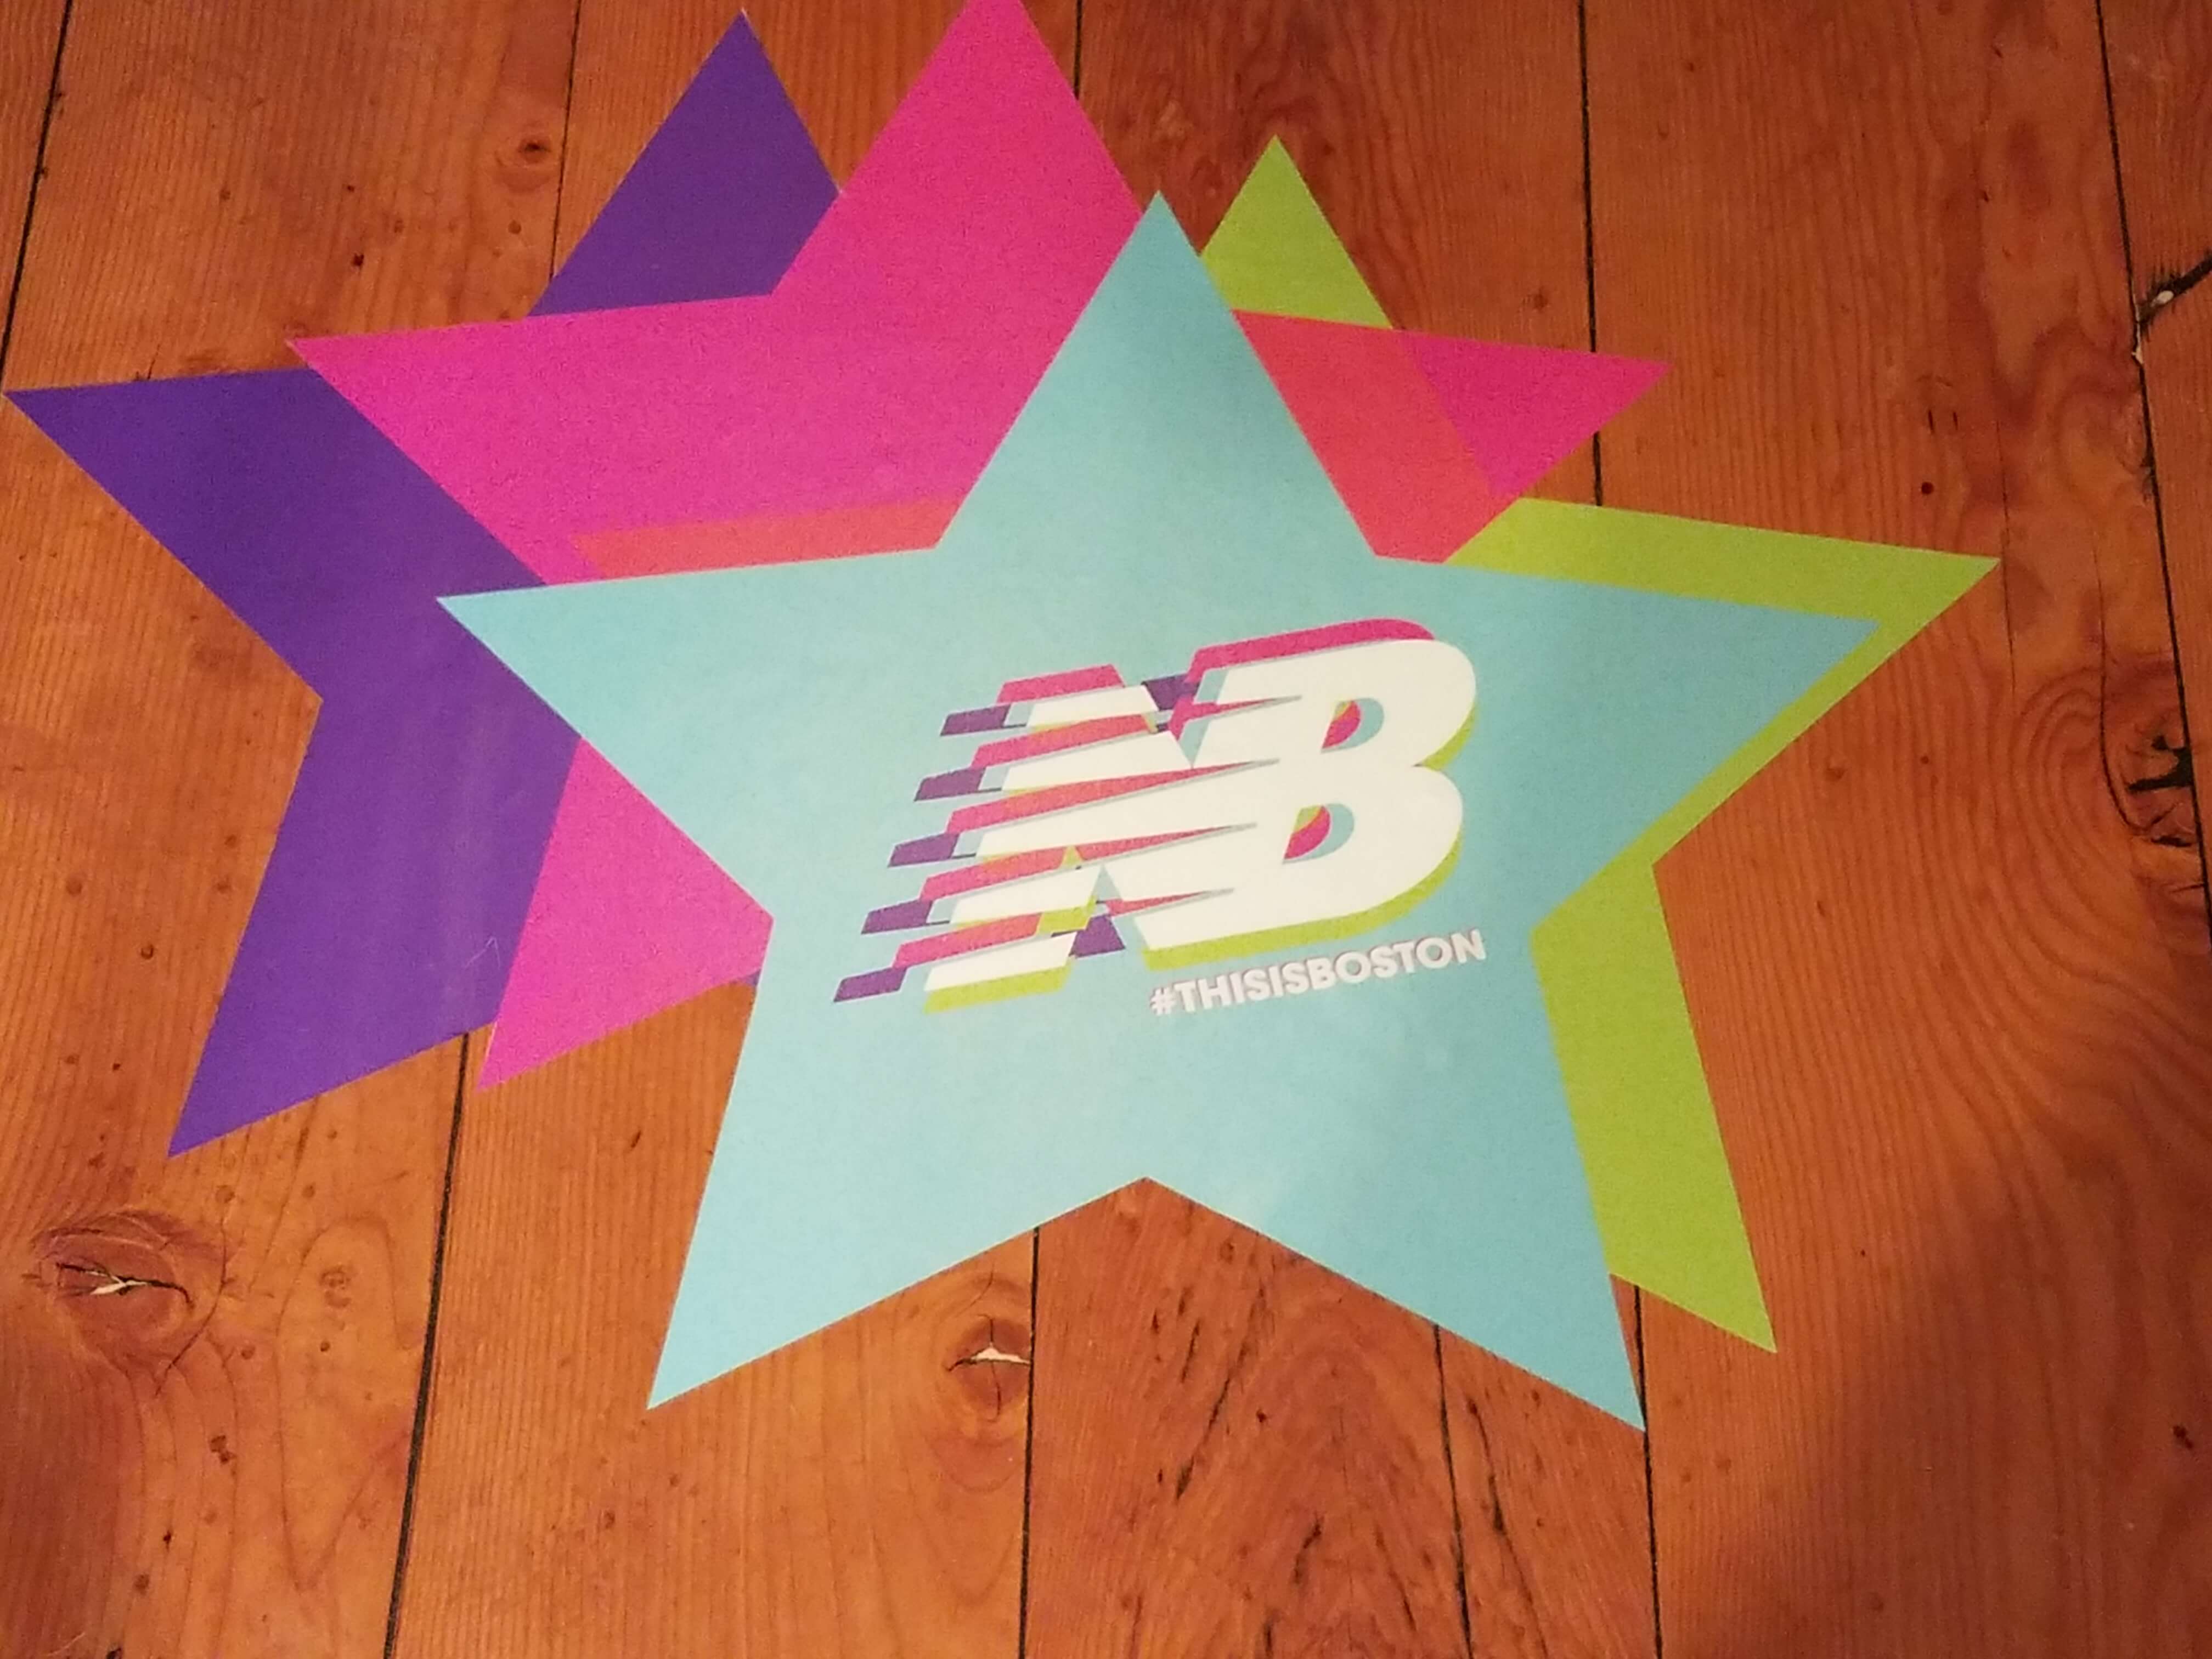 New Balance This is Boston Star shaped Floor Decal